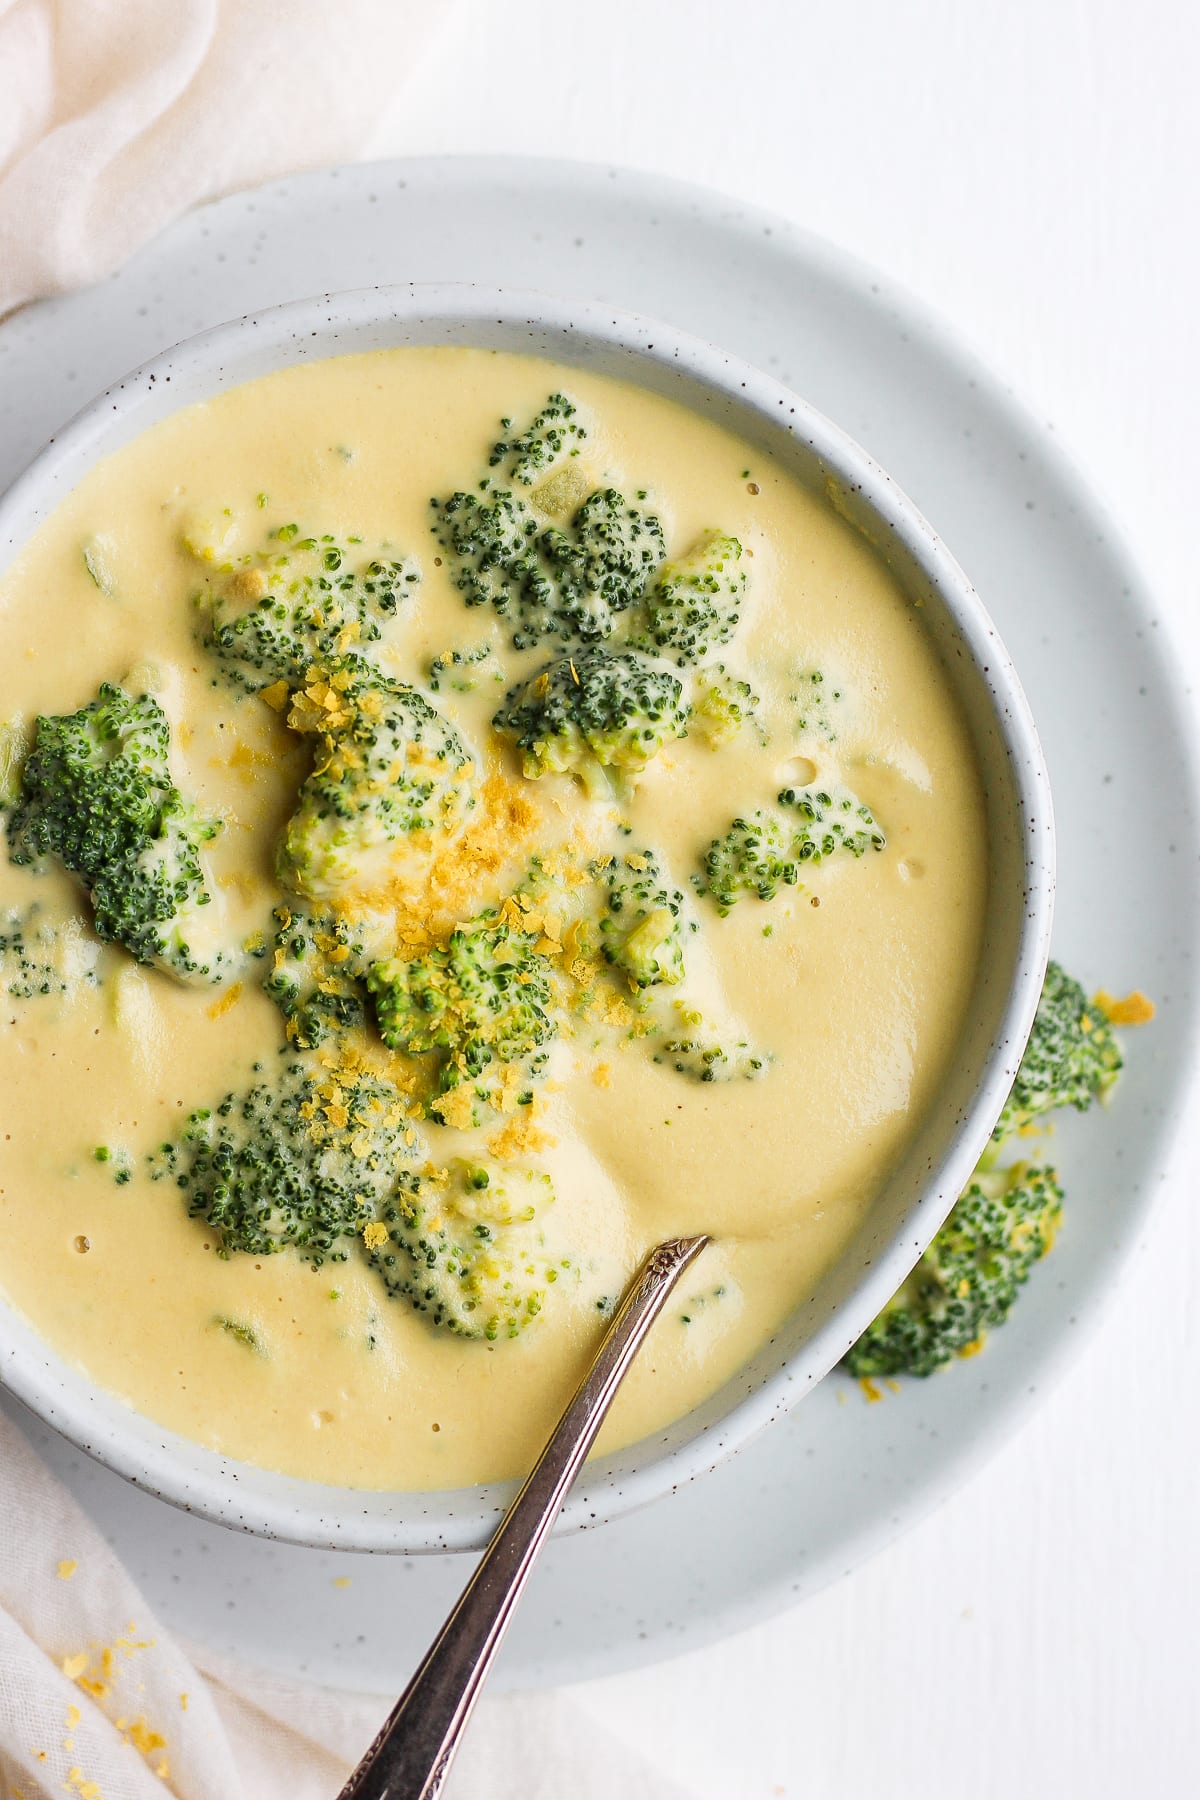 Dreamy Dairy-Free Broccoli Cheese Soup 